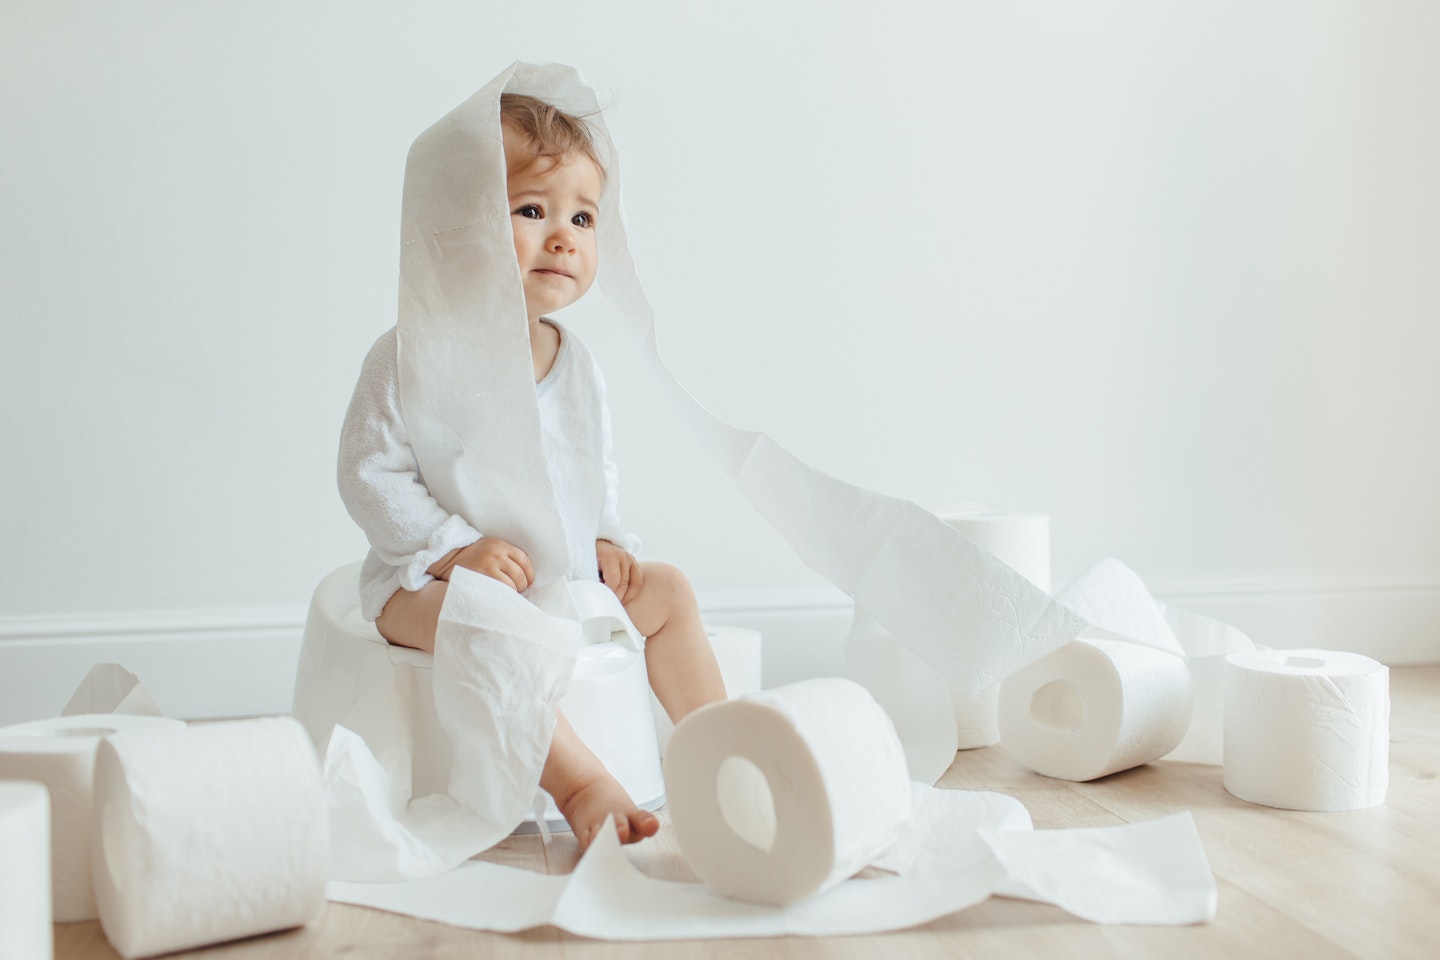 Cute baby girl sitting on white chamber pot with toilet paper rolls. Funny toddler sitting on potty chair and playing with toilet paper.